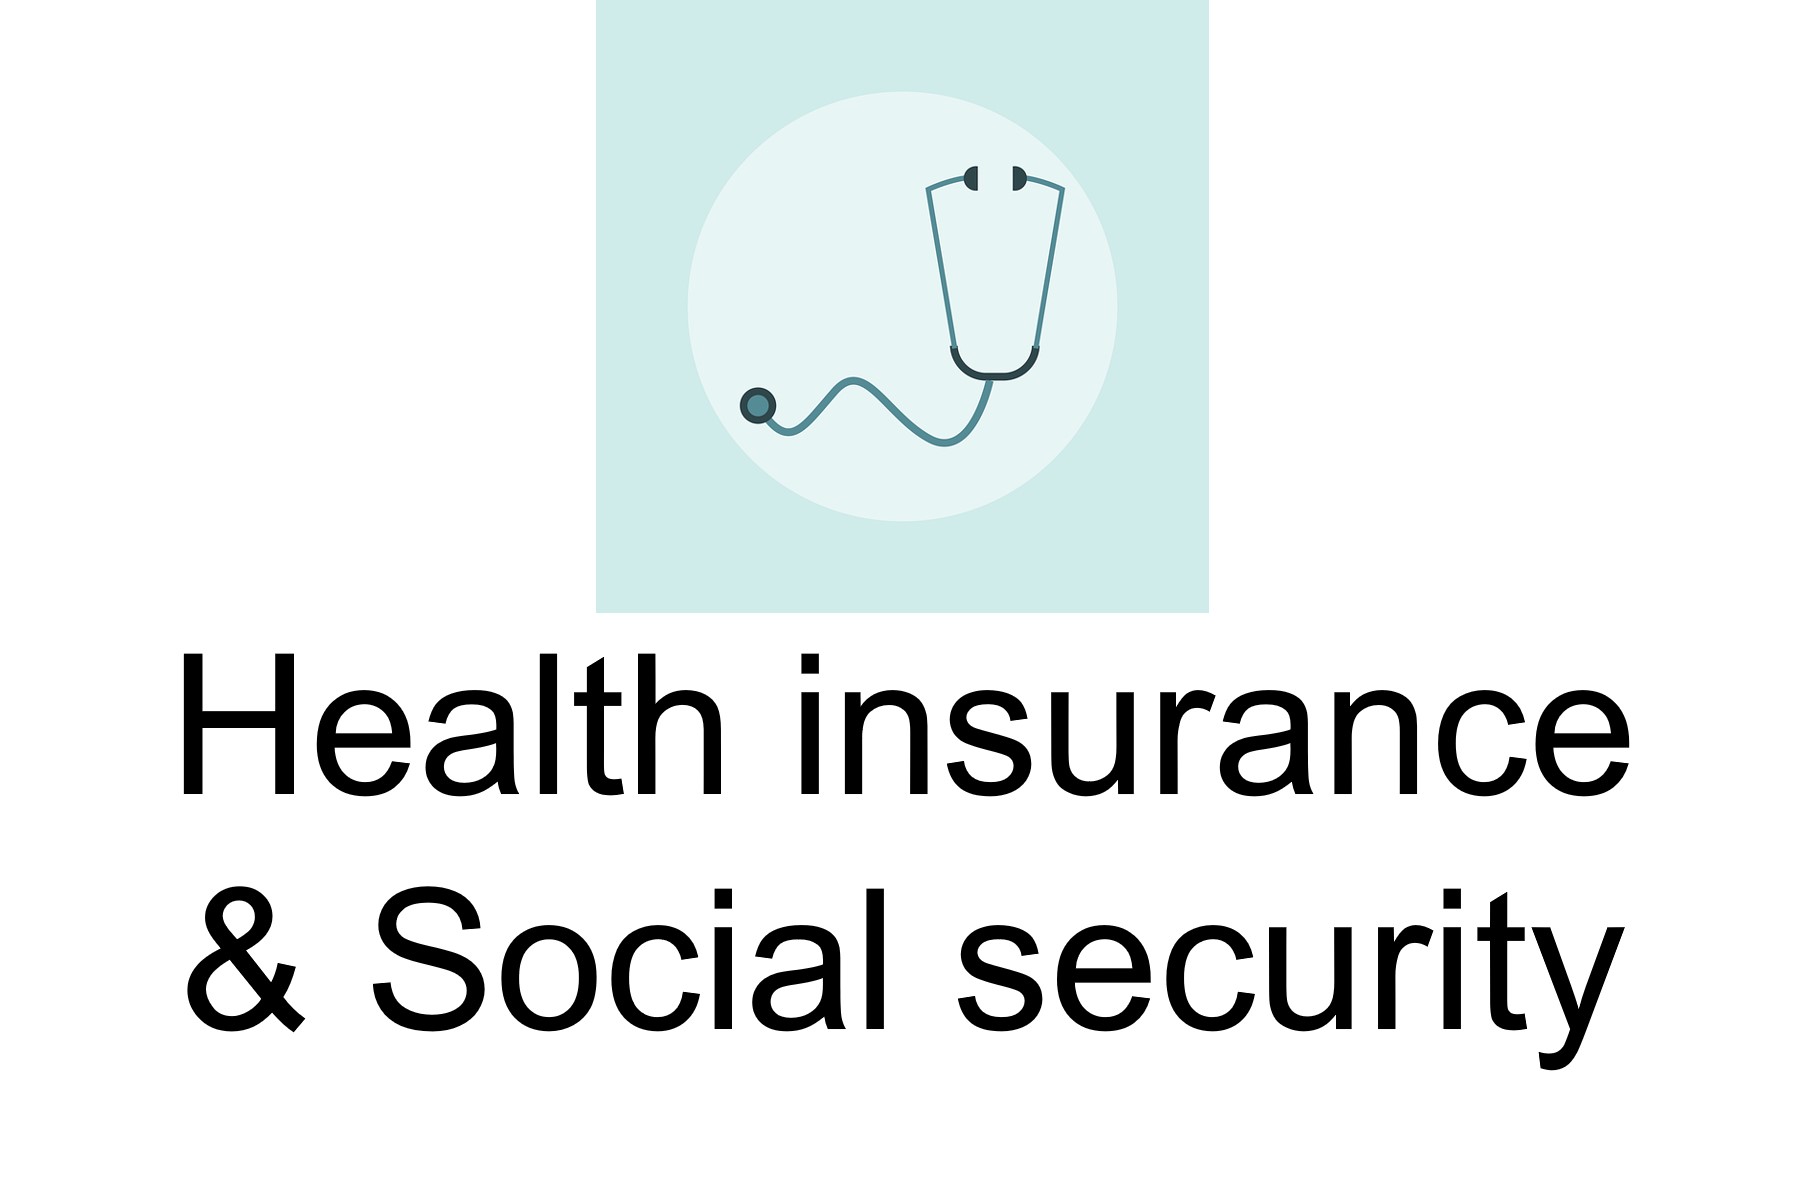 Stethoscope icon to be clicked to access the information page on health insurance